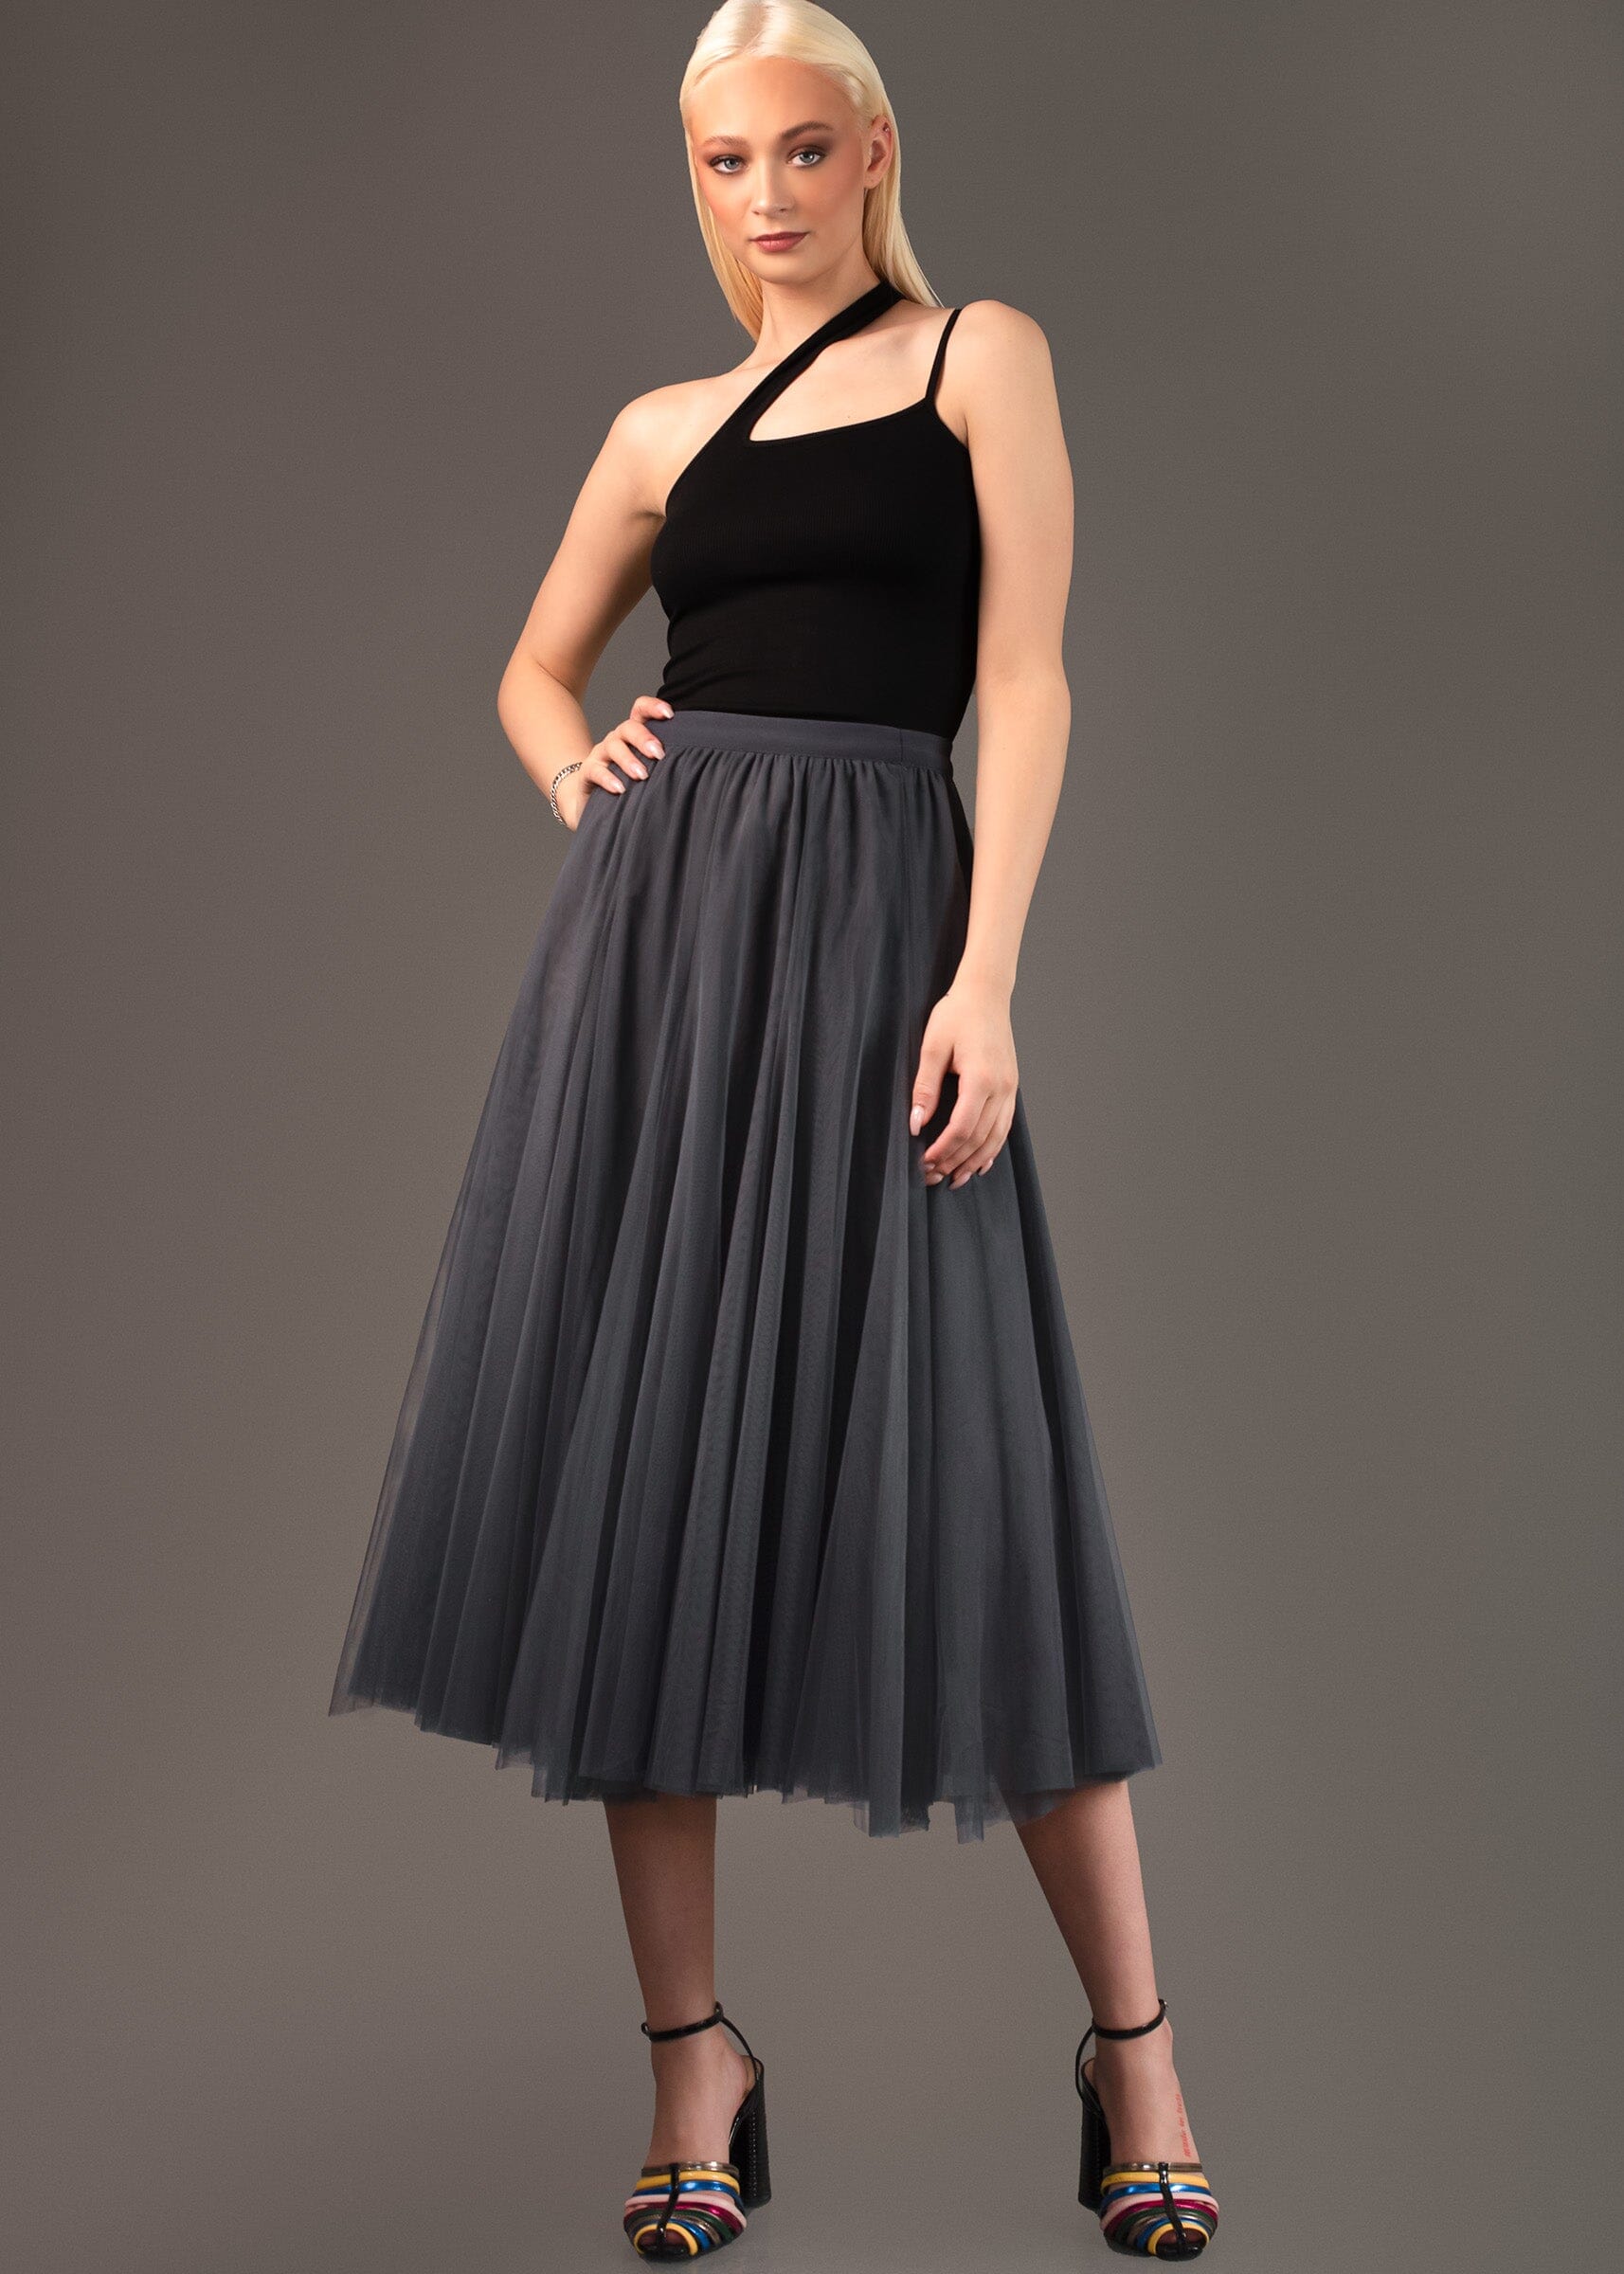 A-Line Tulle Skirt - Kate Hewko Concept Store